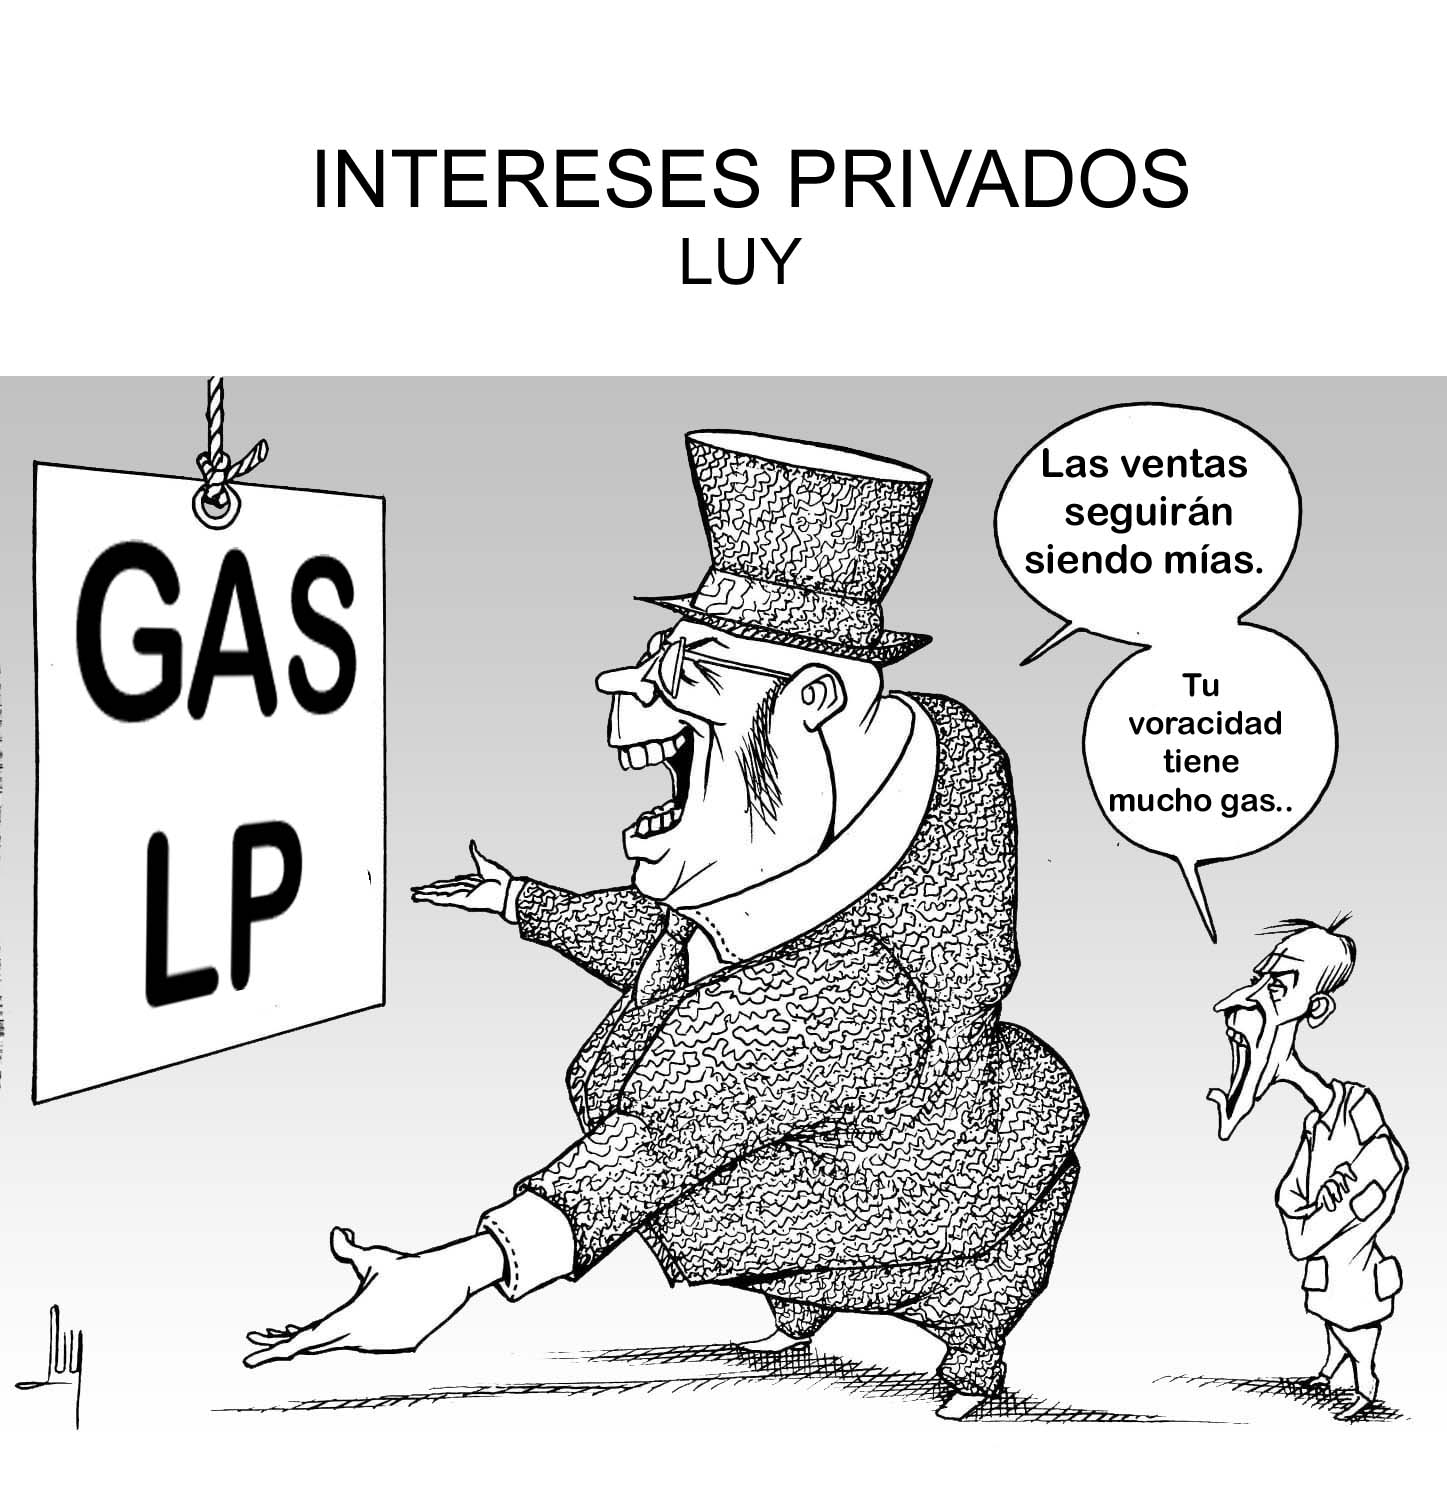 INTERESES PRIVADOS-LUY